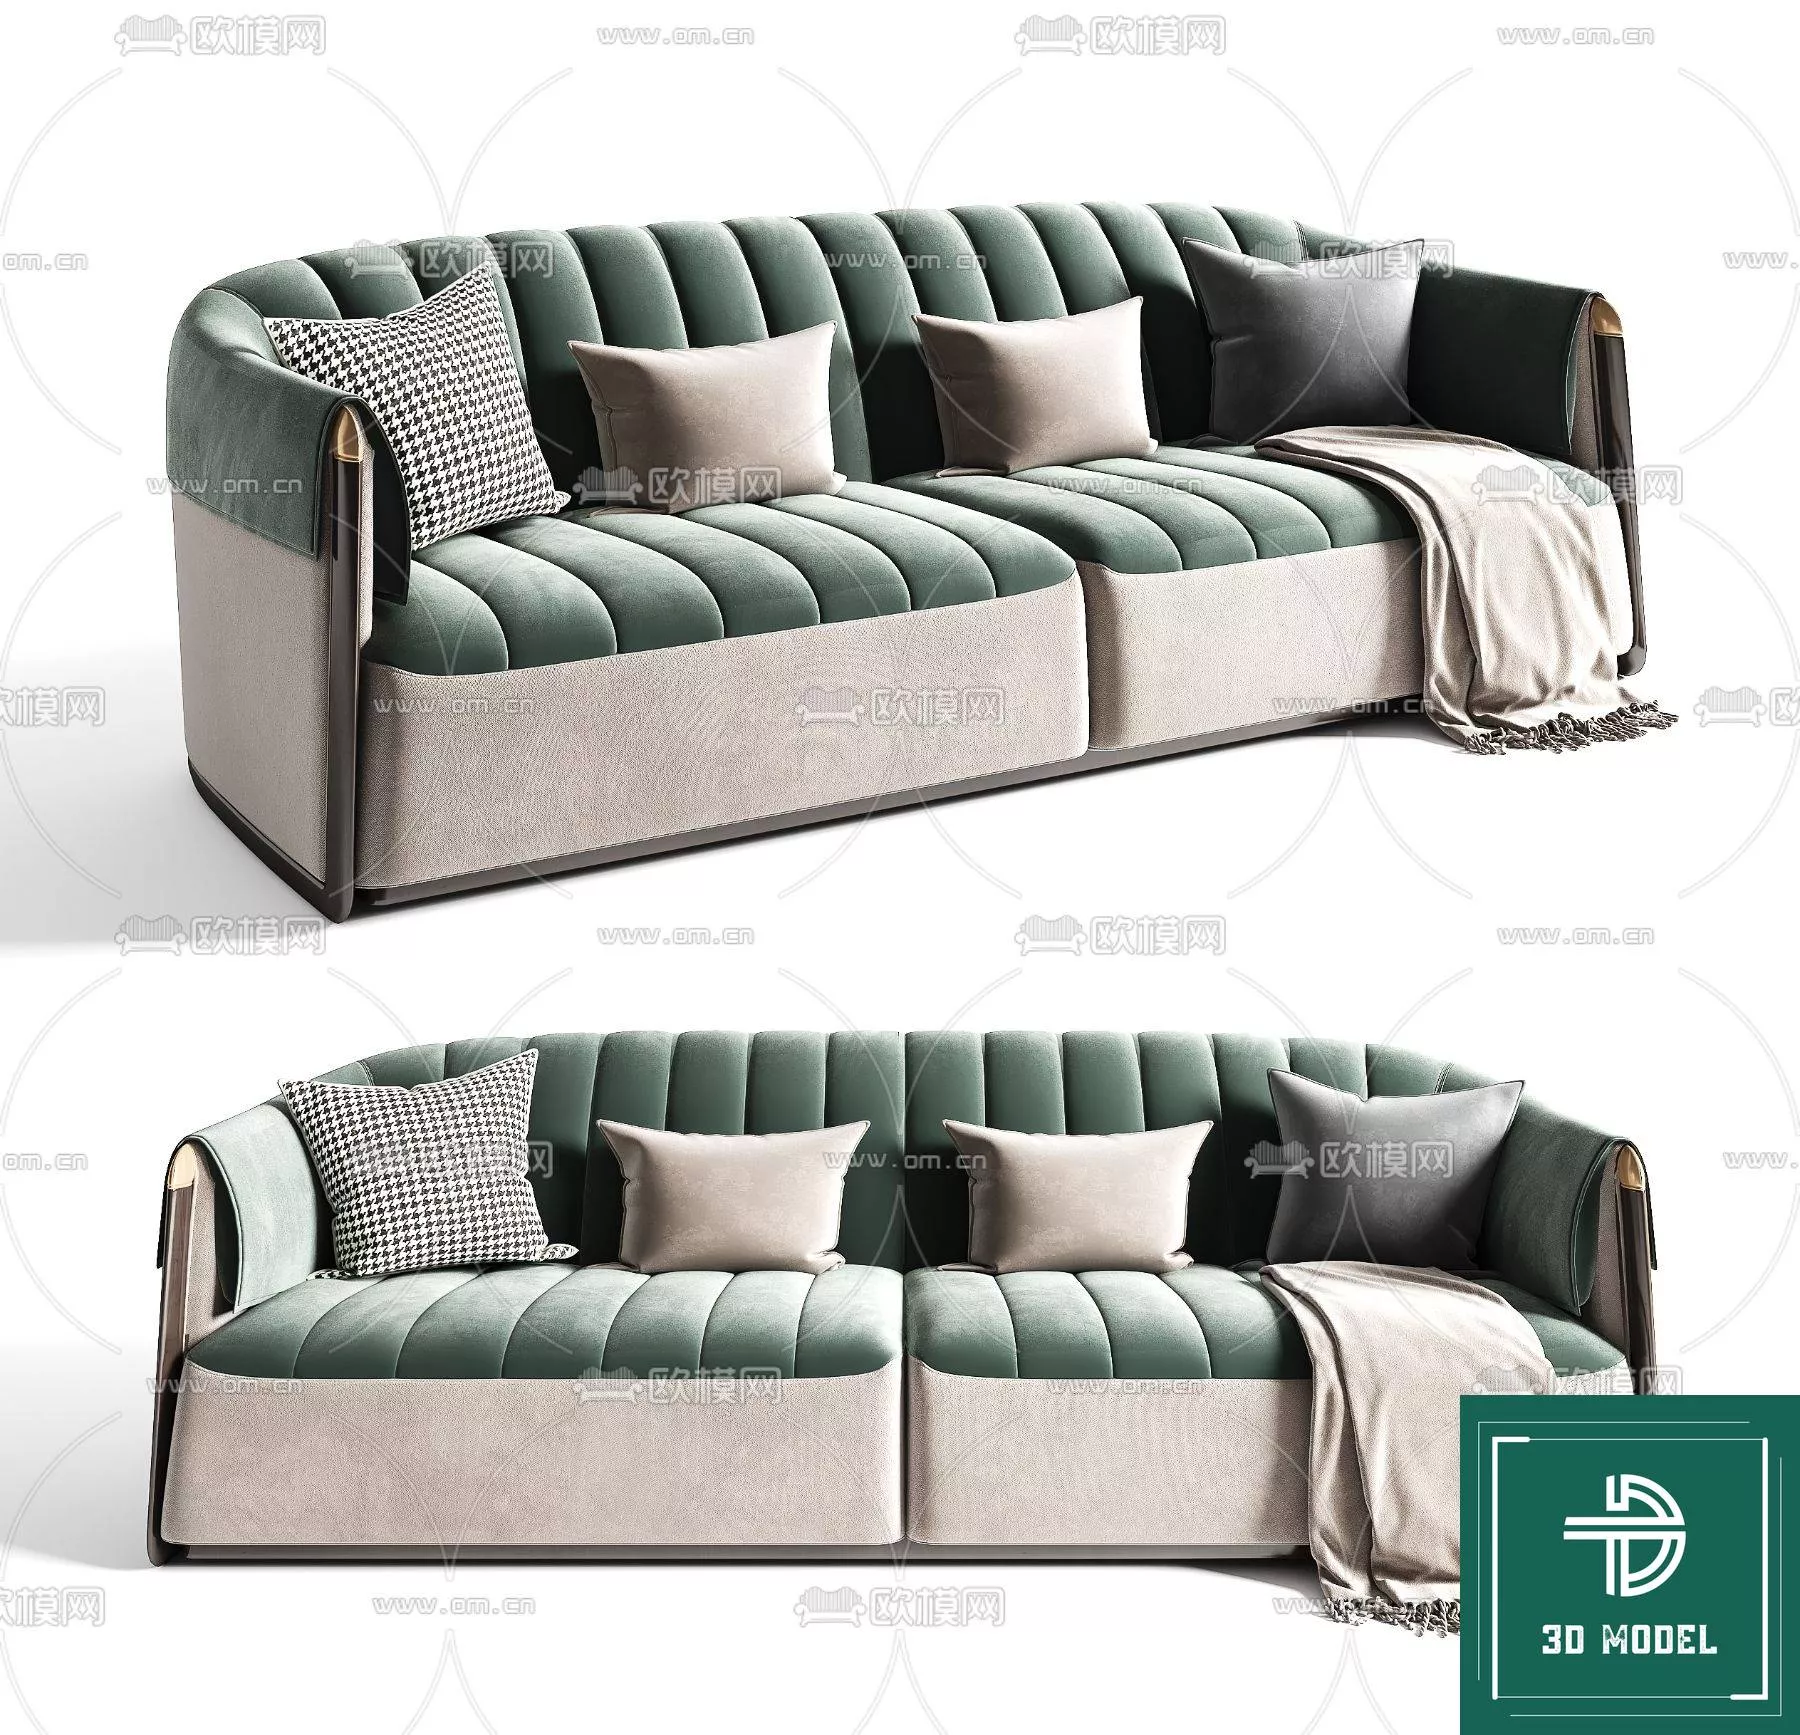 MODERN SOFA - SKETCHUP 3D MODEL - VRAY OR ENSCAPE - ID13294